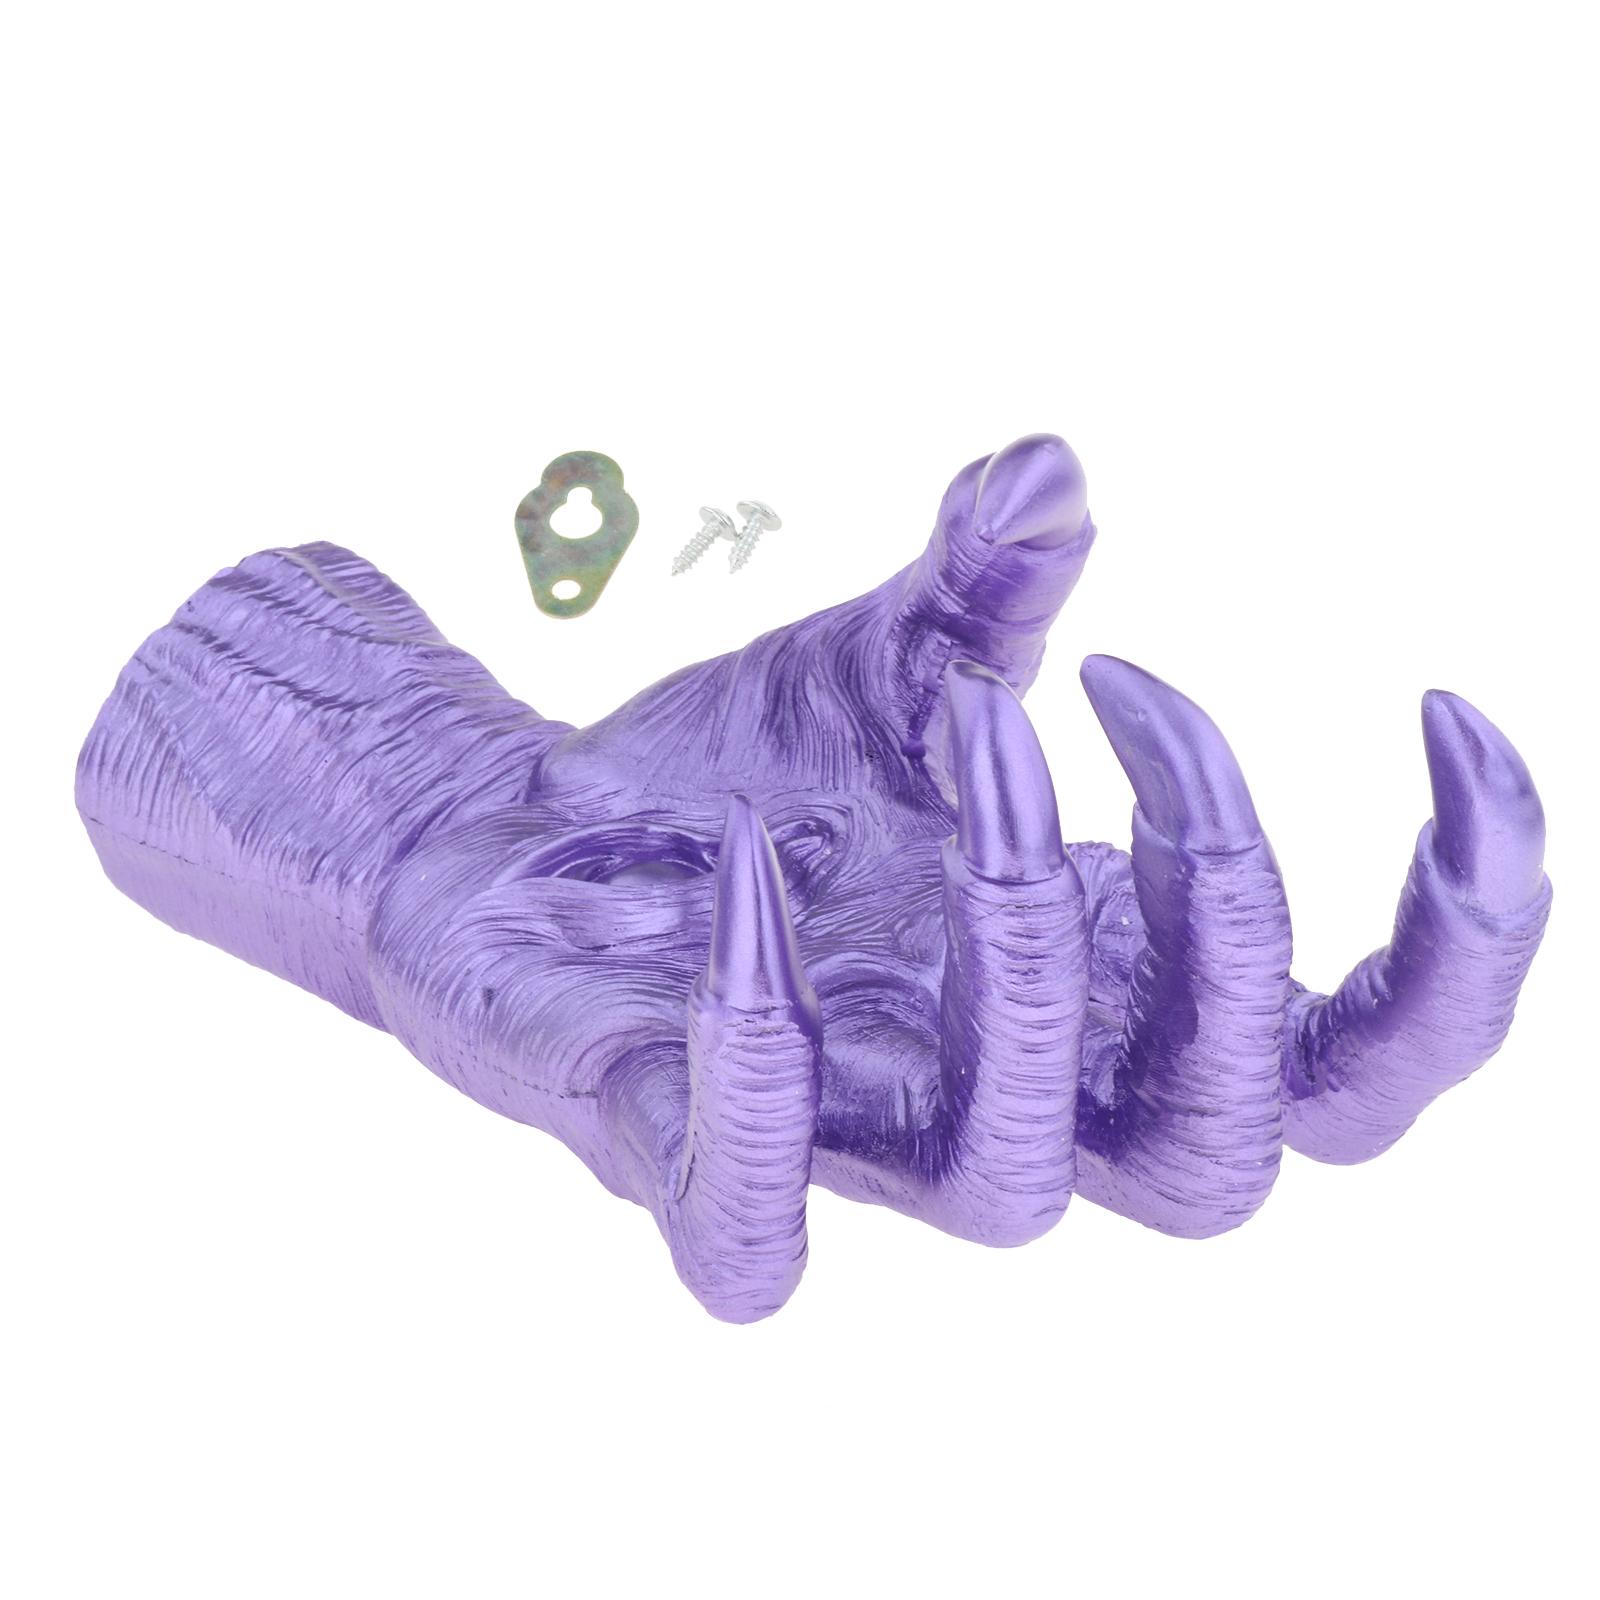 Witch's Demon Hand Wall Hanging Statue Sculpture for Living Room Purple